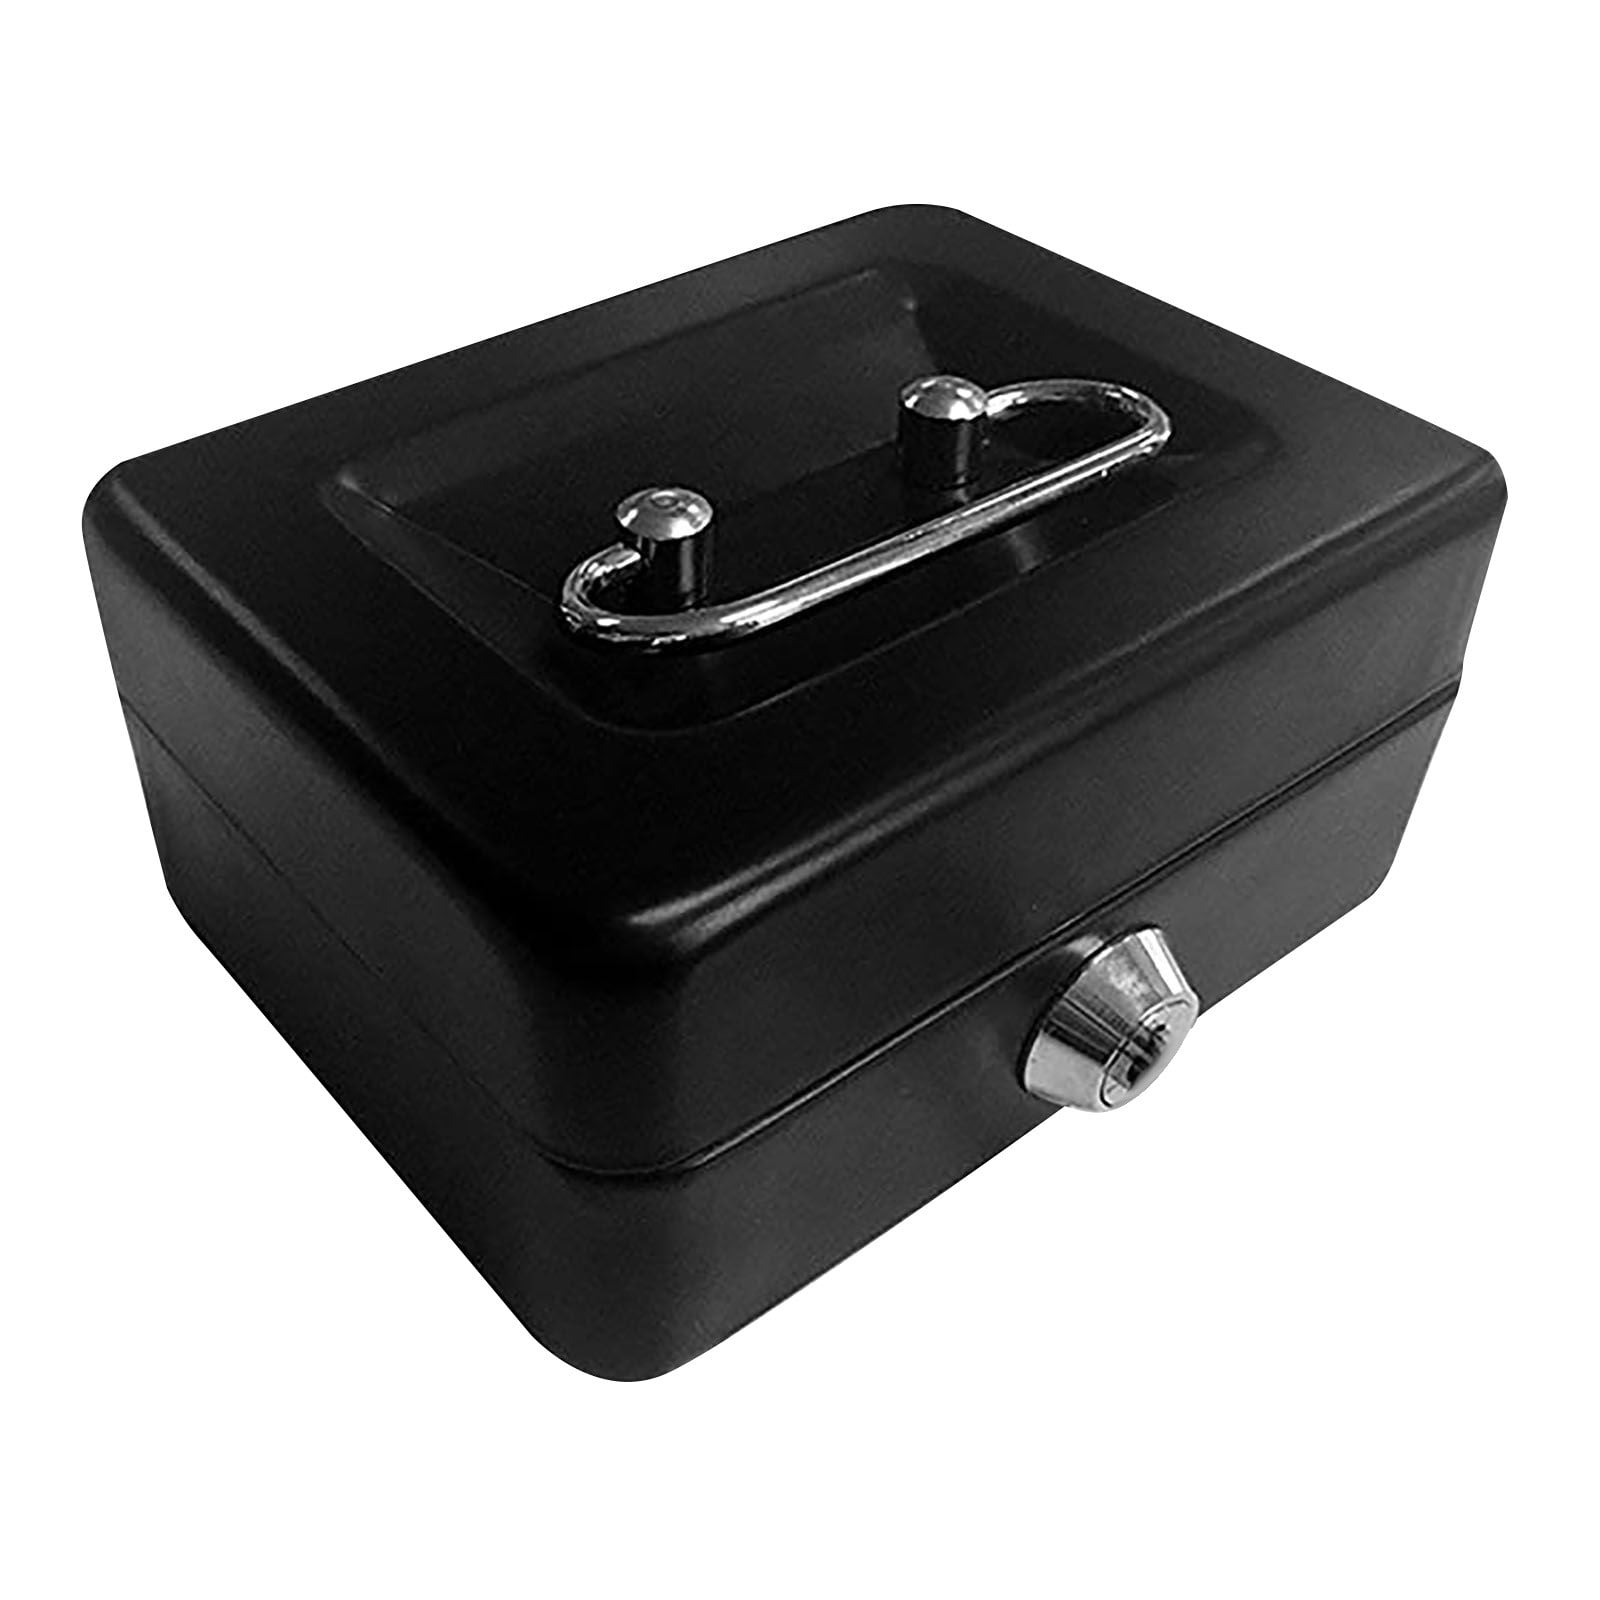 Cash Box with Key Lock Portable Metal Money Box with Double Layer and 2 Keys for Security 15 x 12 x 7.6 cm Blue 